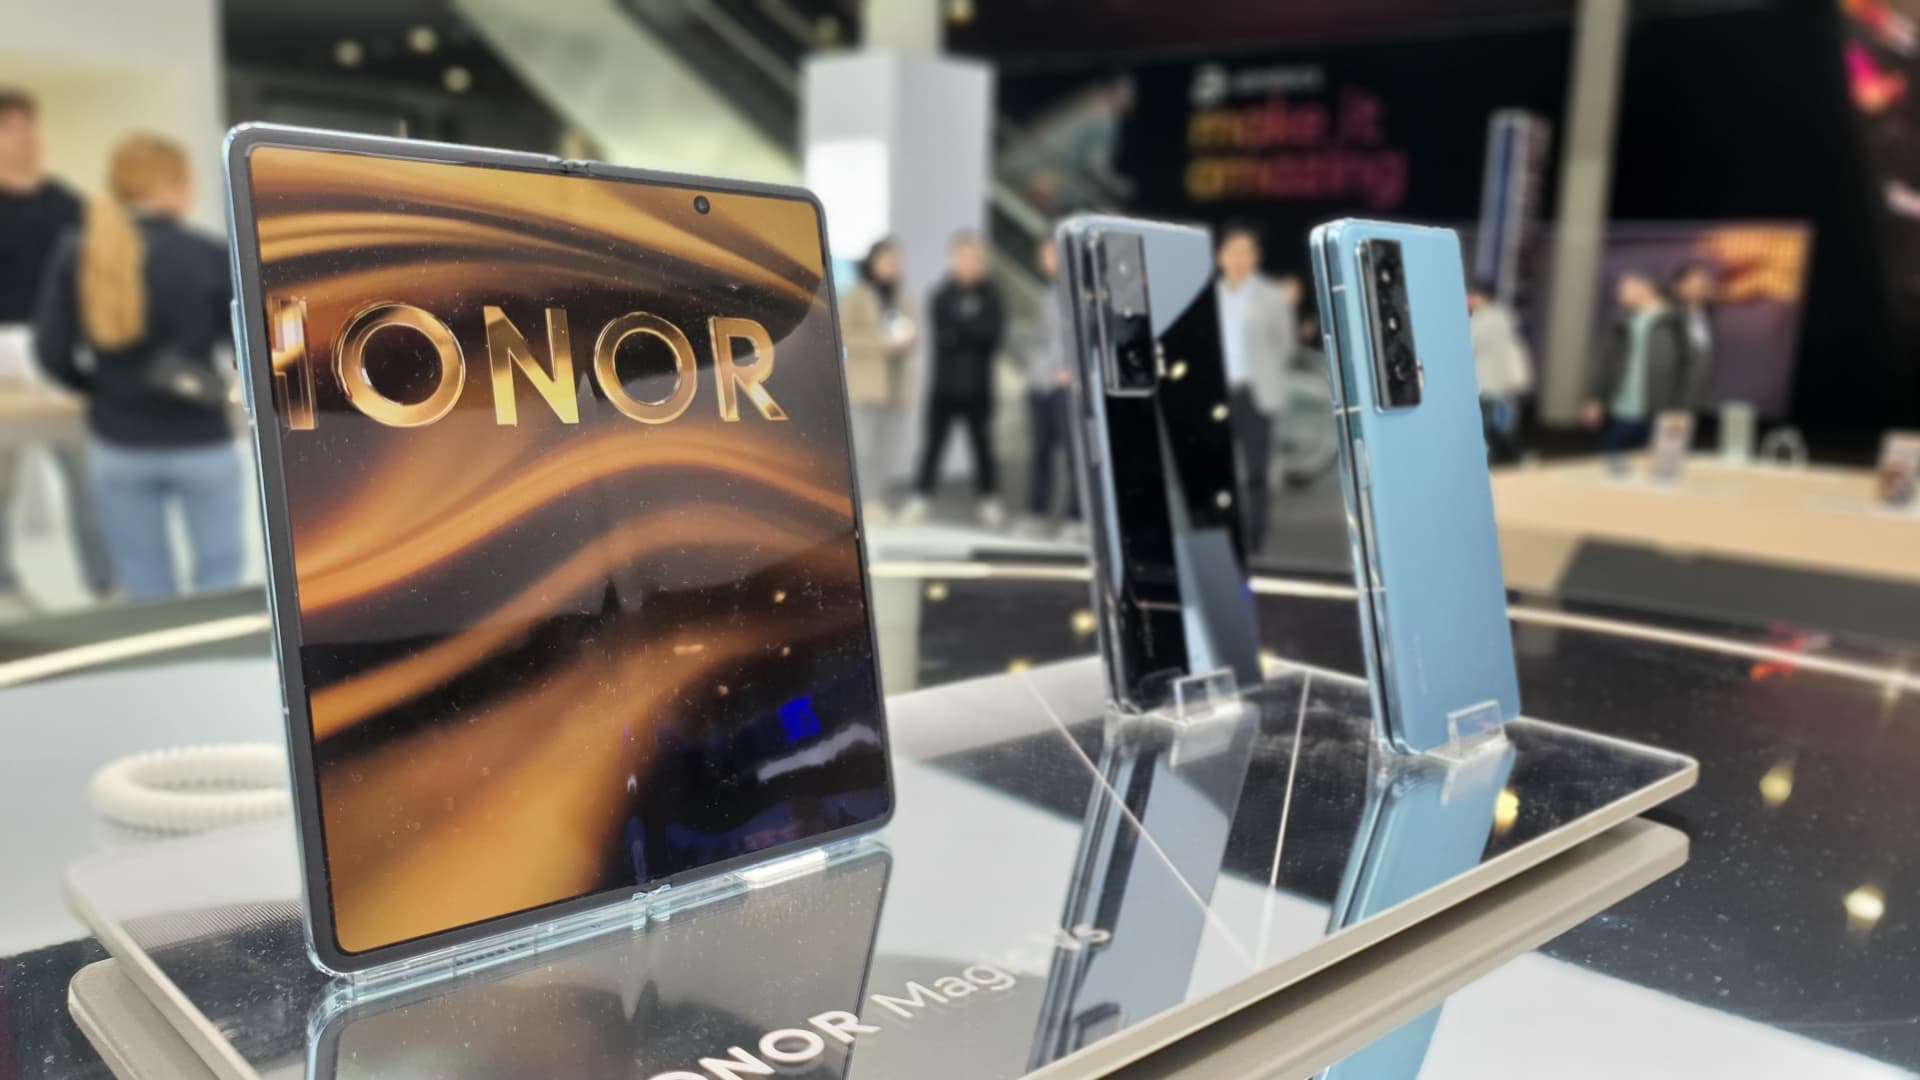 Huawei spin-off Honor takes aim at Samsung in foldables; shrugs off U.S. sanction concerns